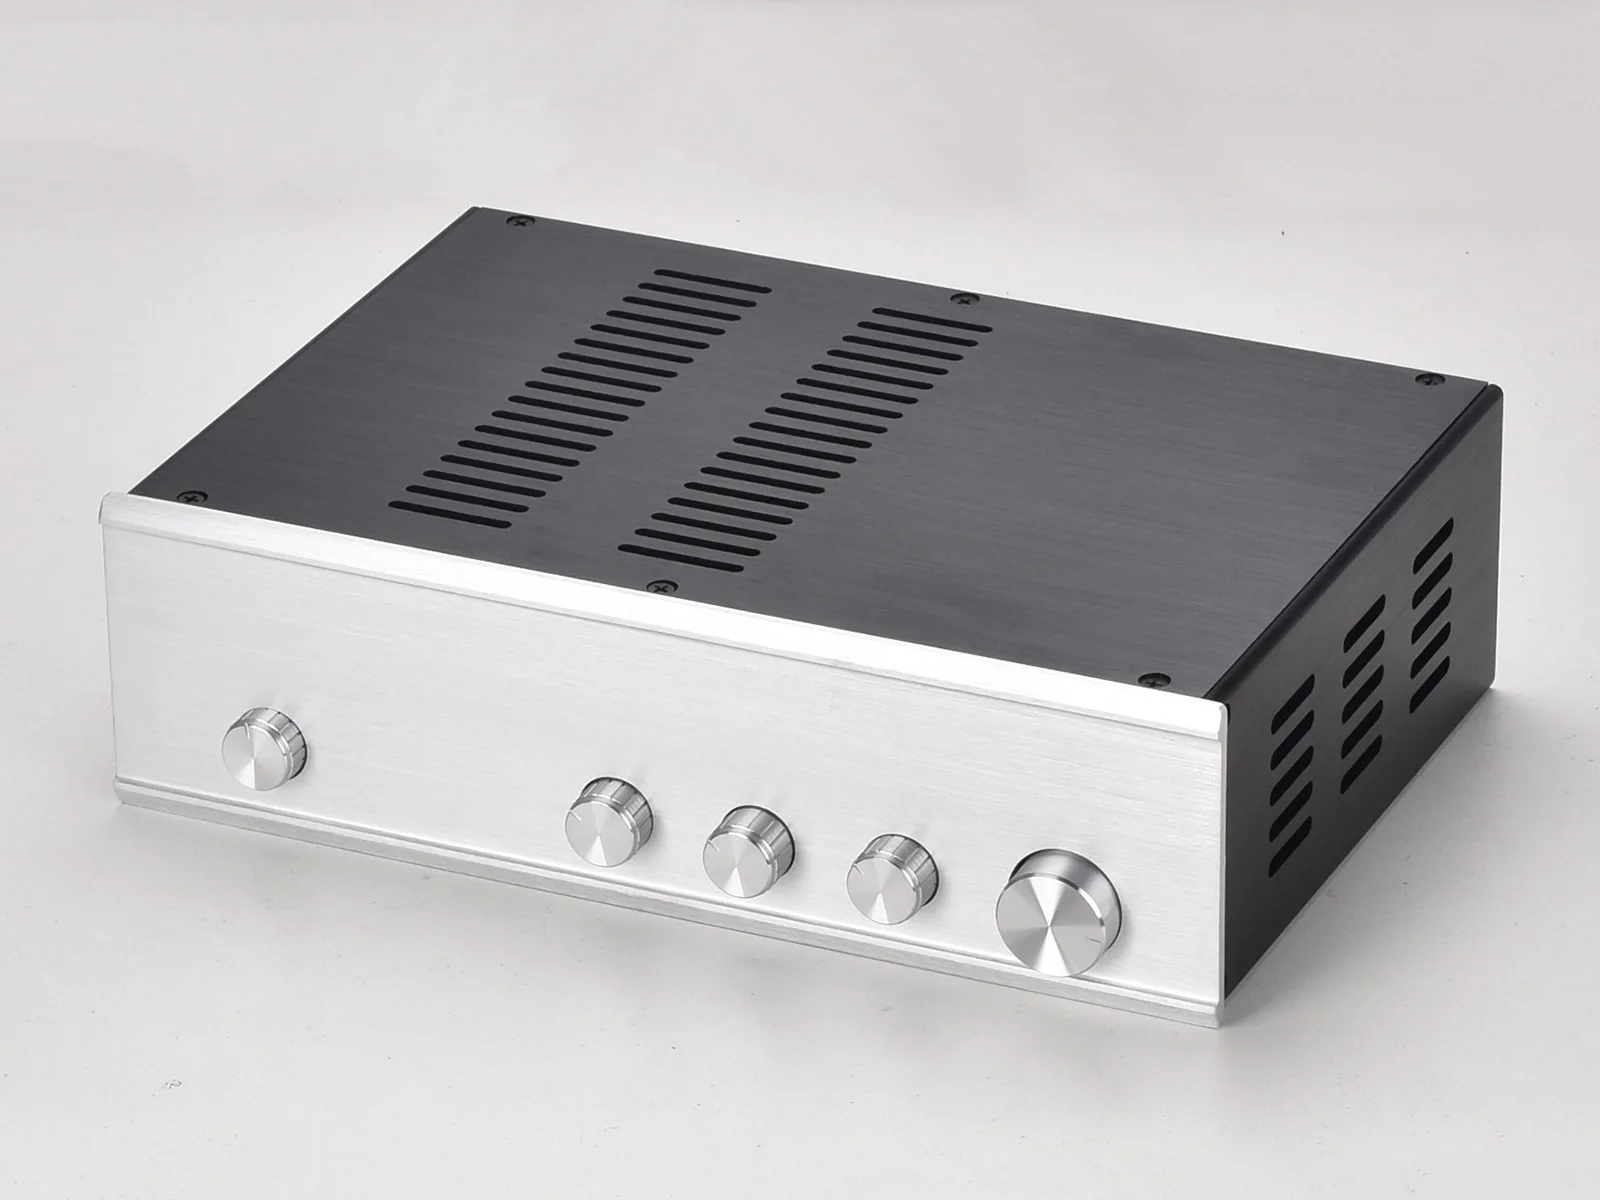 

DIY AMP BOX 314X91X209mm BZ3109 All Aluminum Chassis Can Be Used As Pre-amplifier DAC DIY Amplifier Enclosure